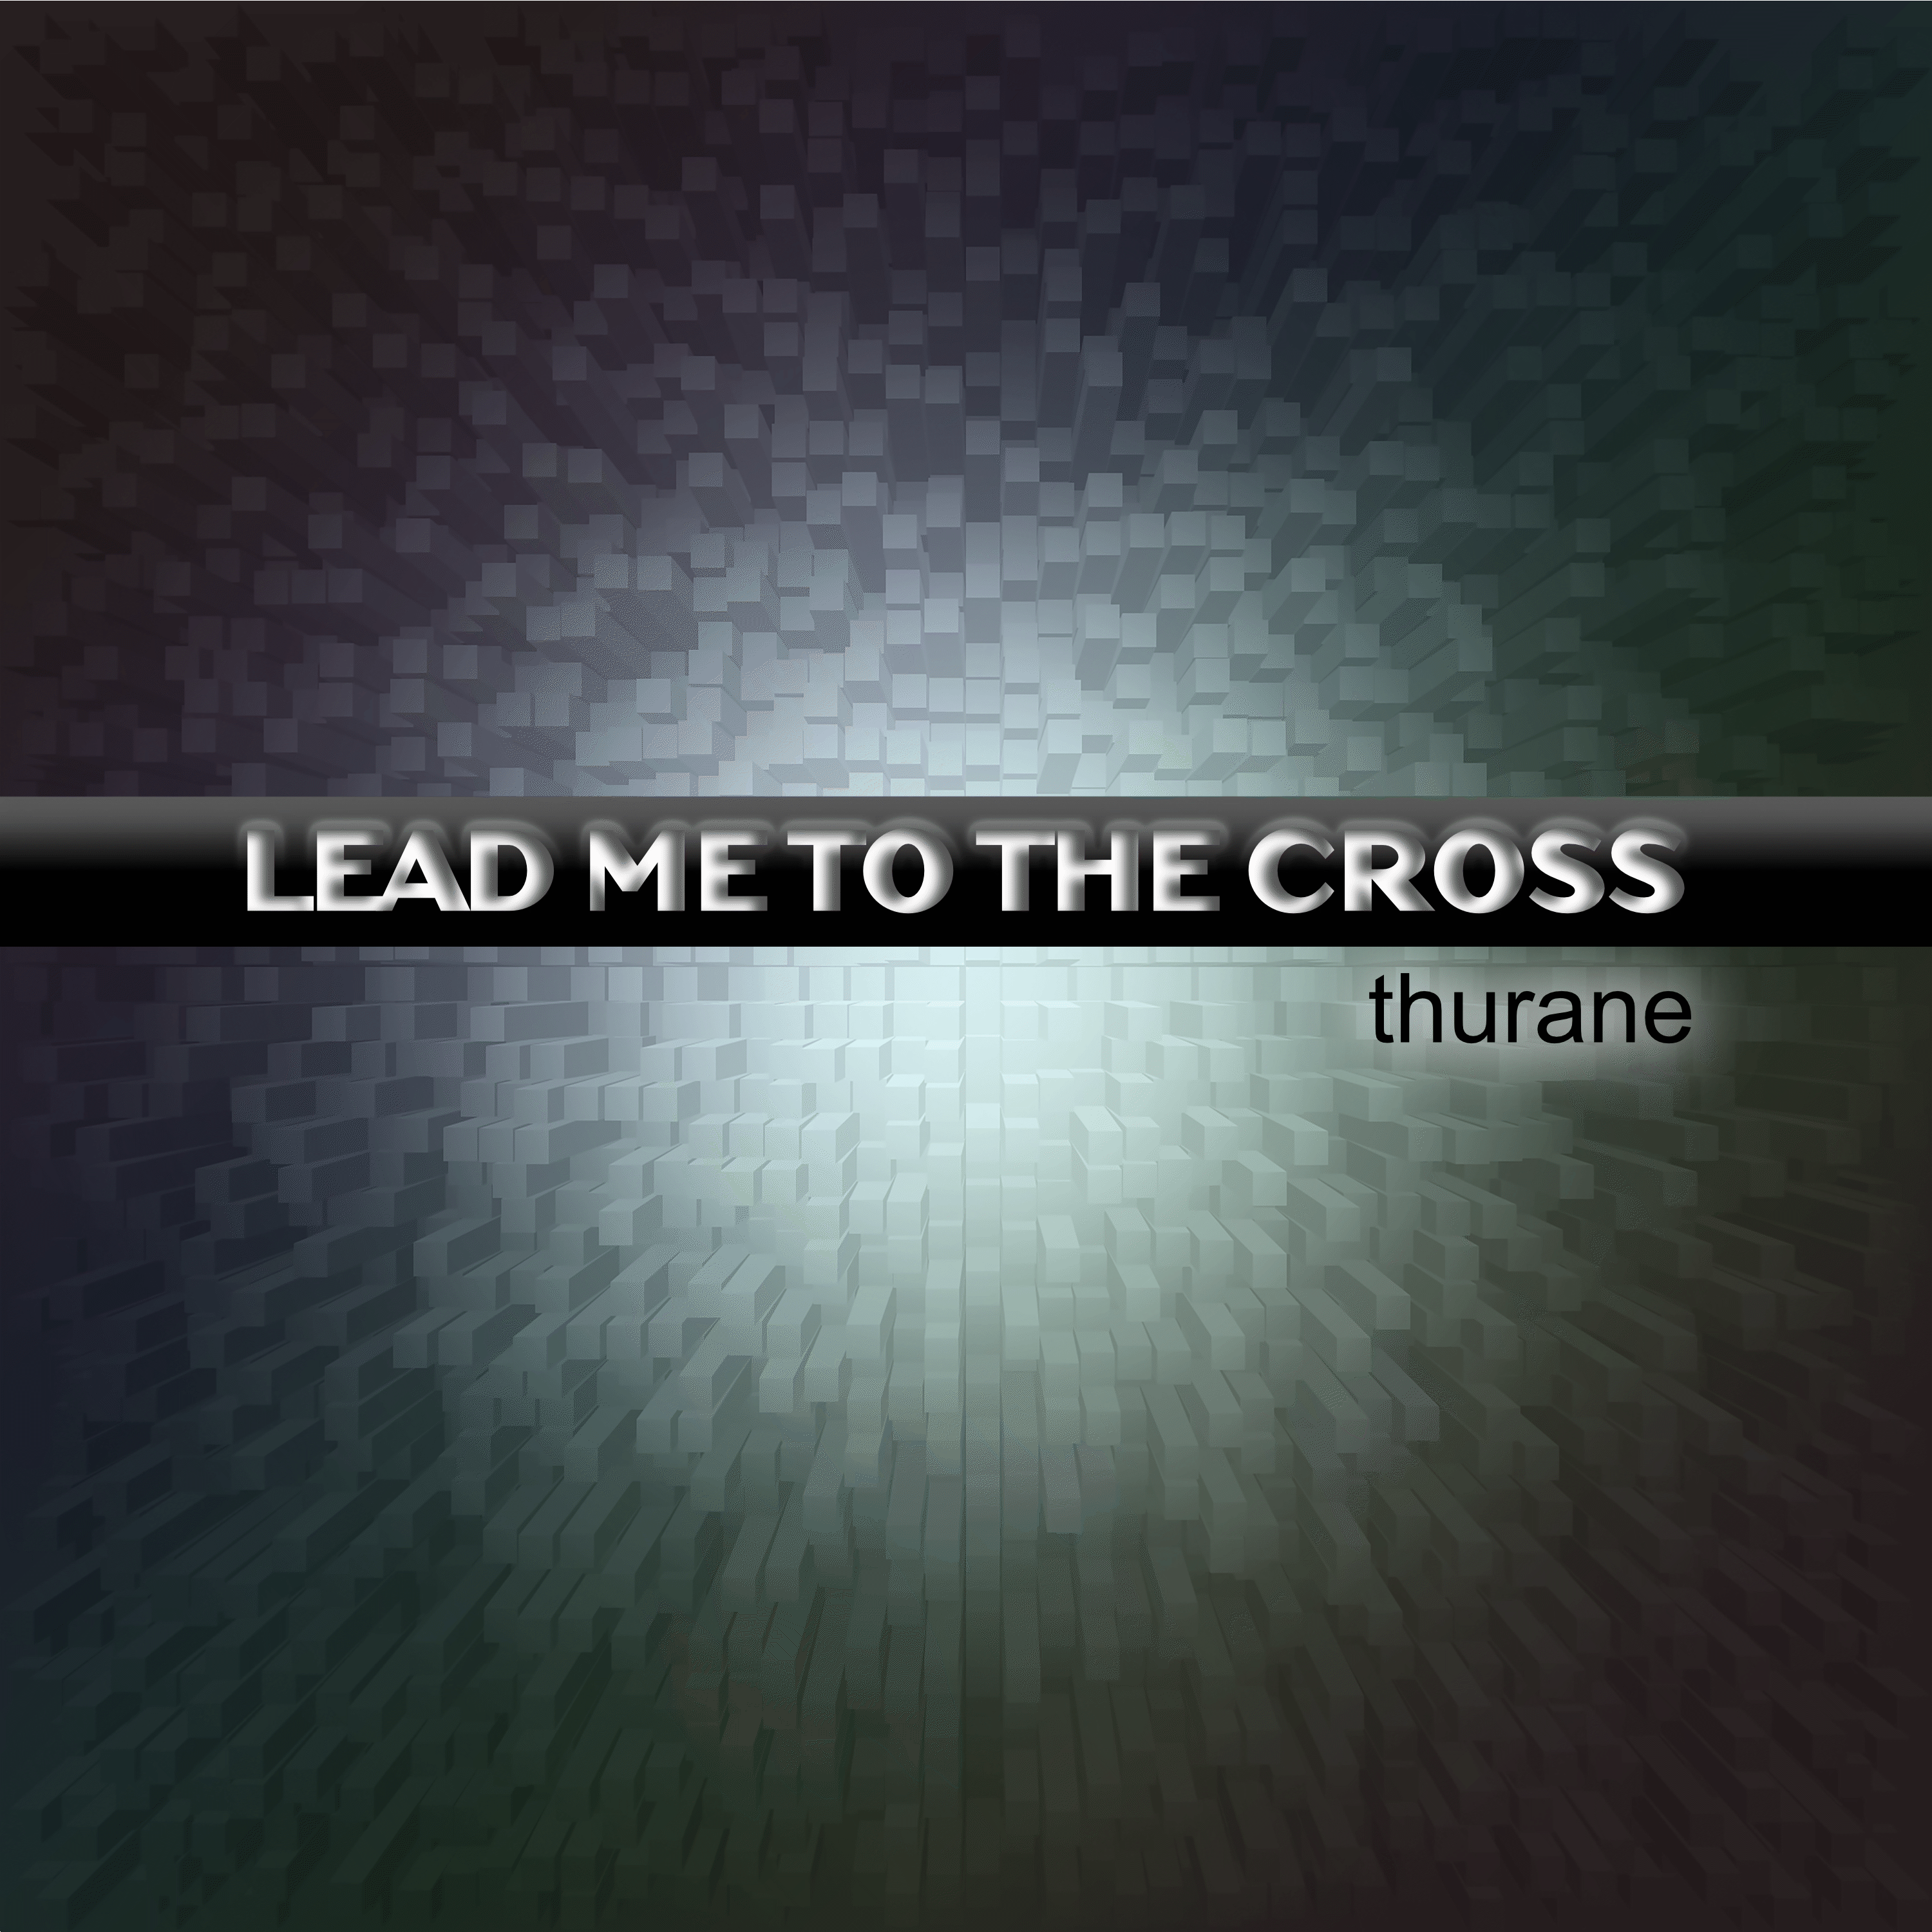 Lead Me To the Cross by THURANE Single Artwork